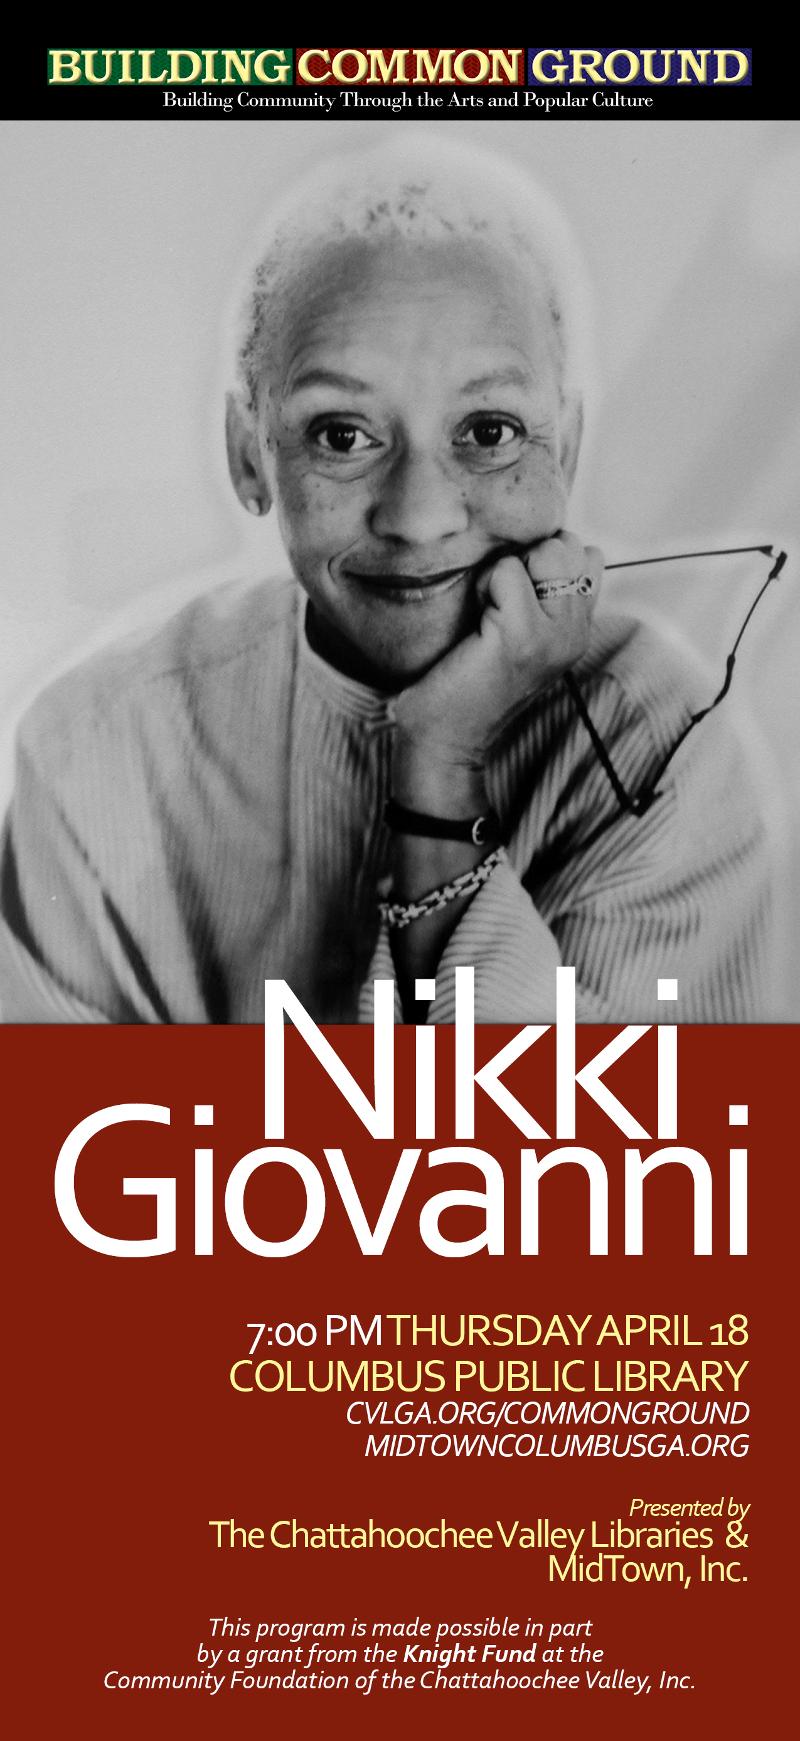 Building Common Ground Lecture Series: Community Inspired to Action Through Art w/ Nikki Giovanni